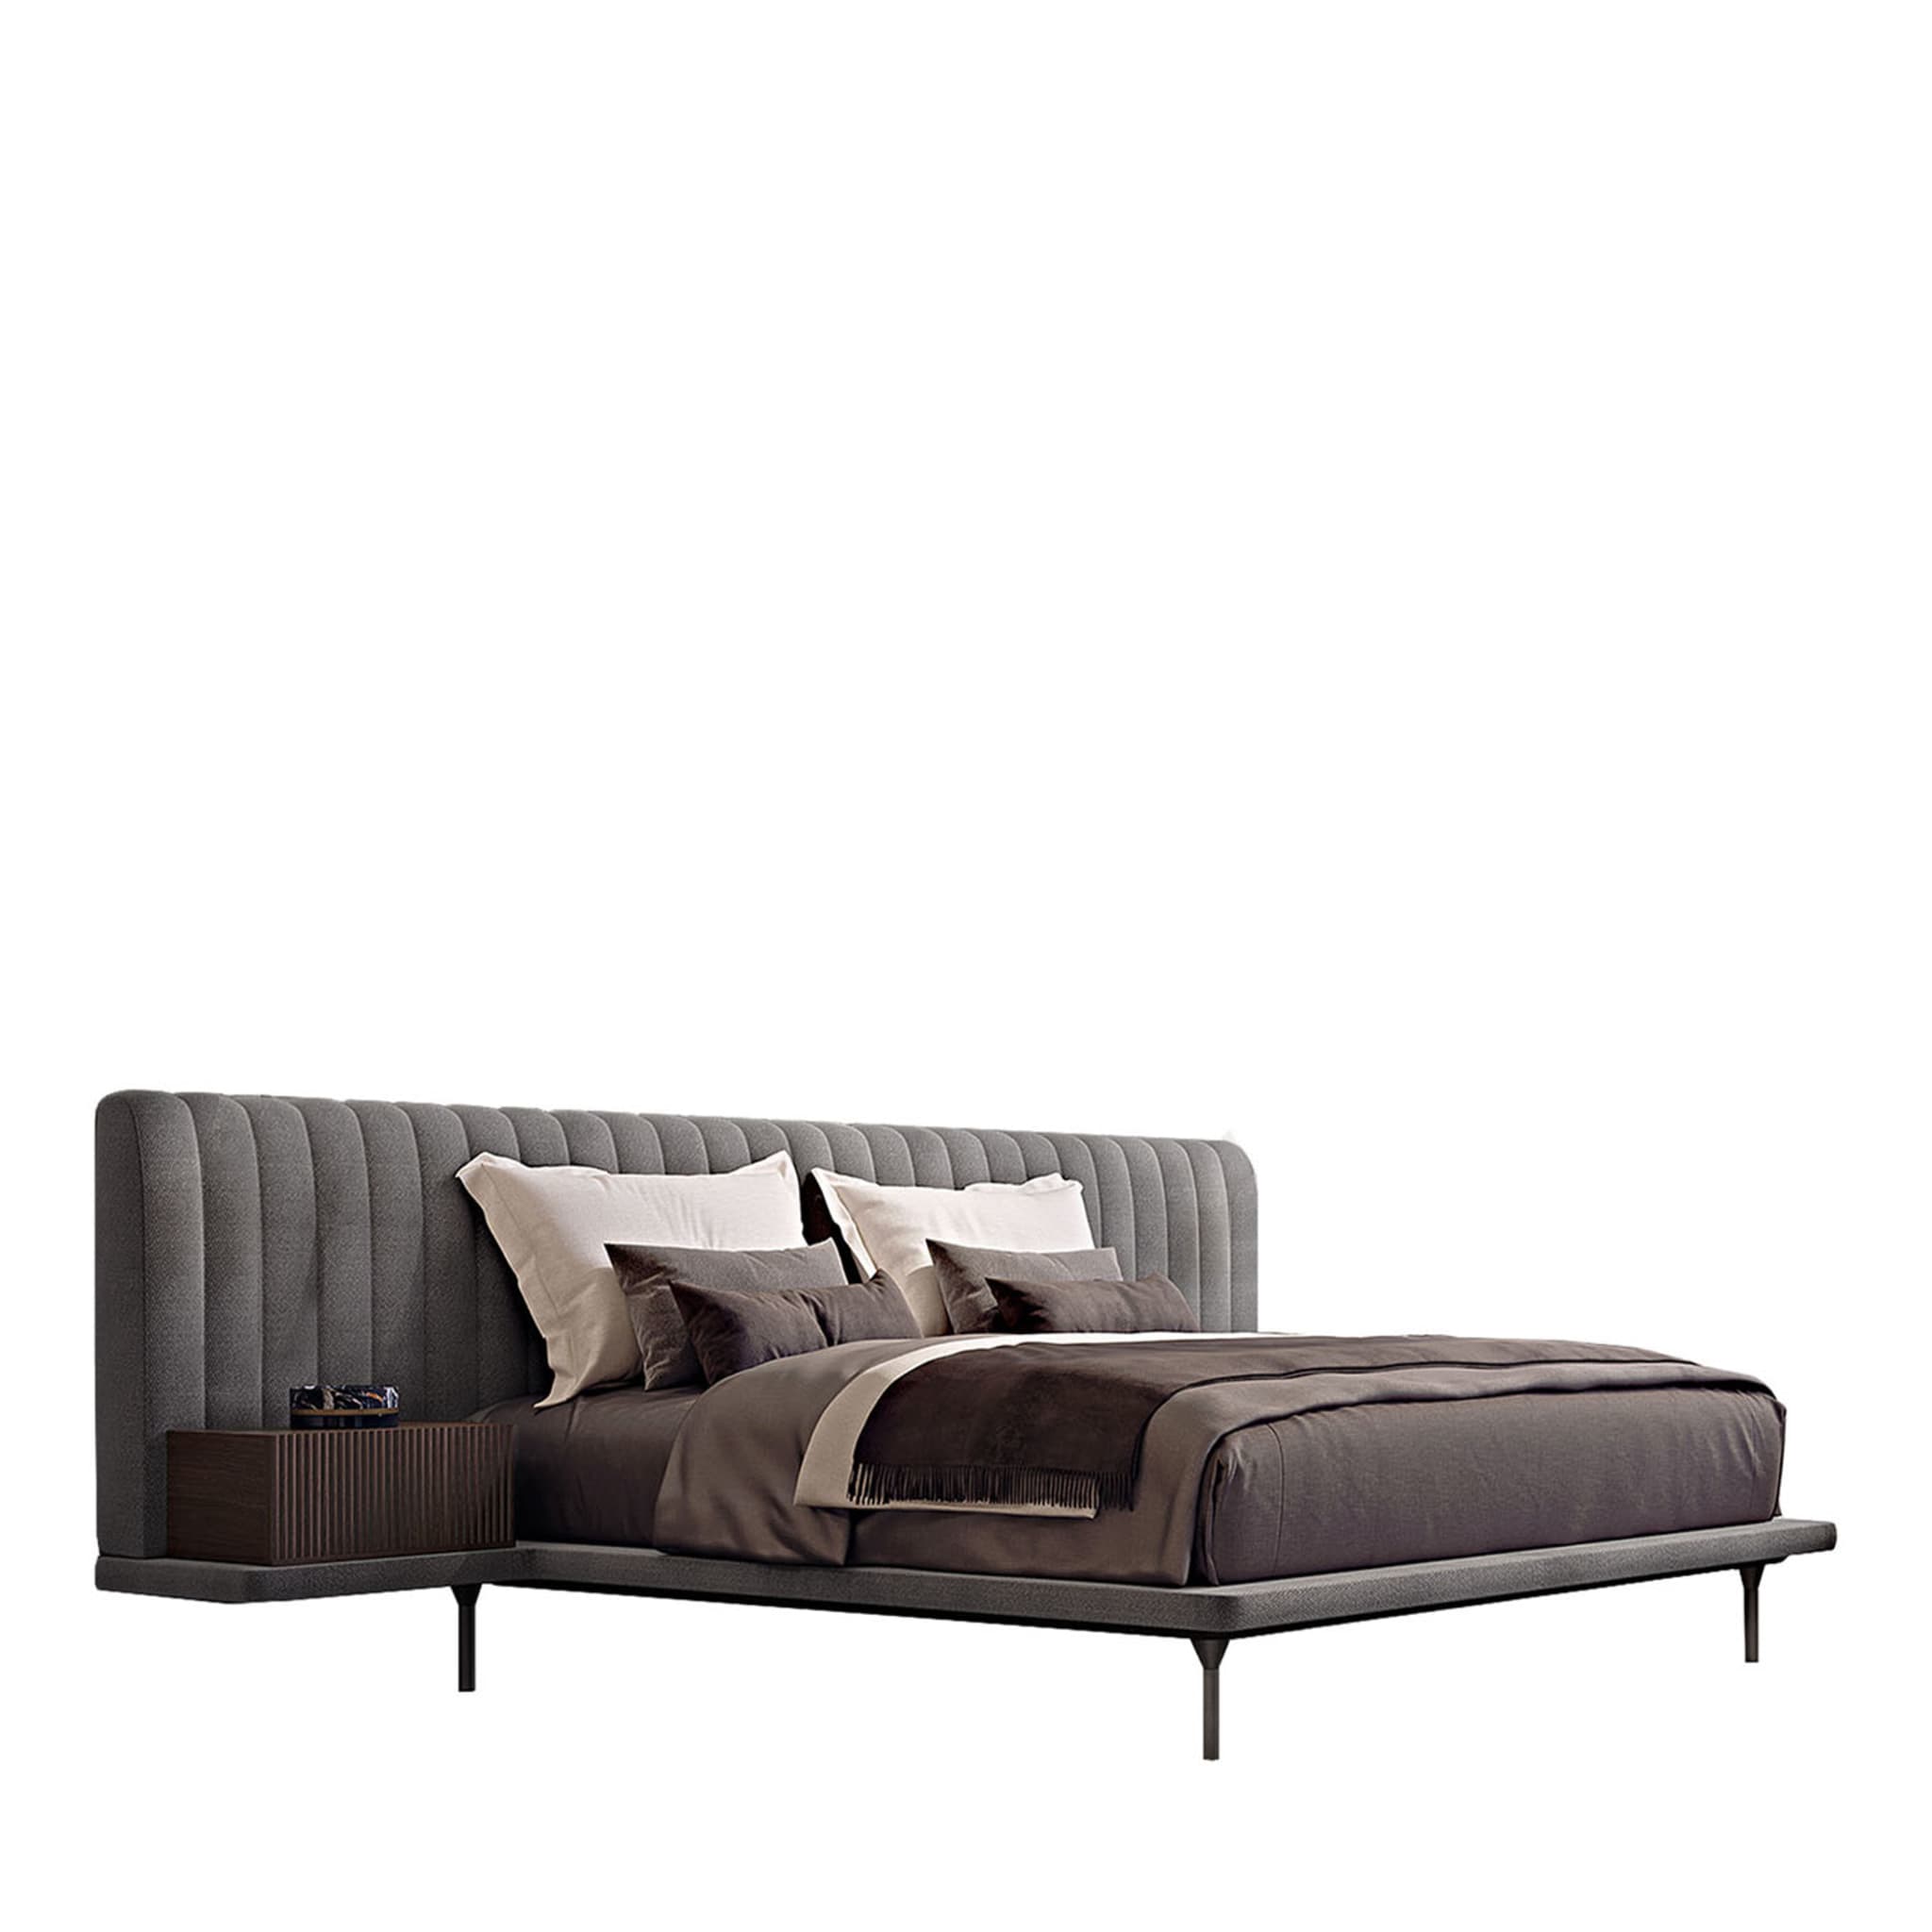 Opale Large Channeled Gray Double Bed - Main view